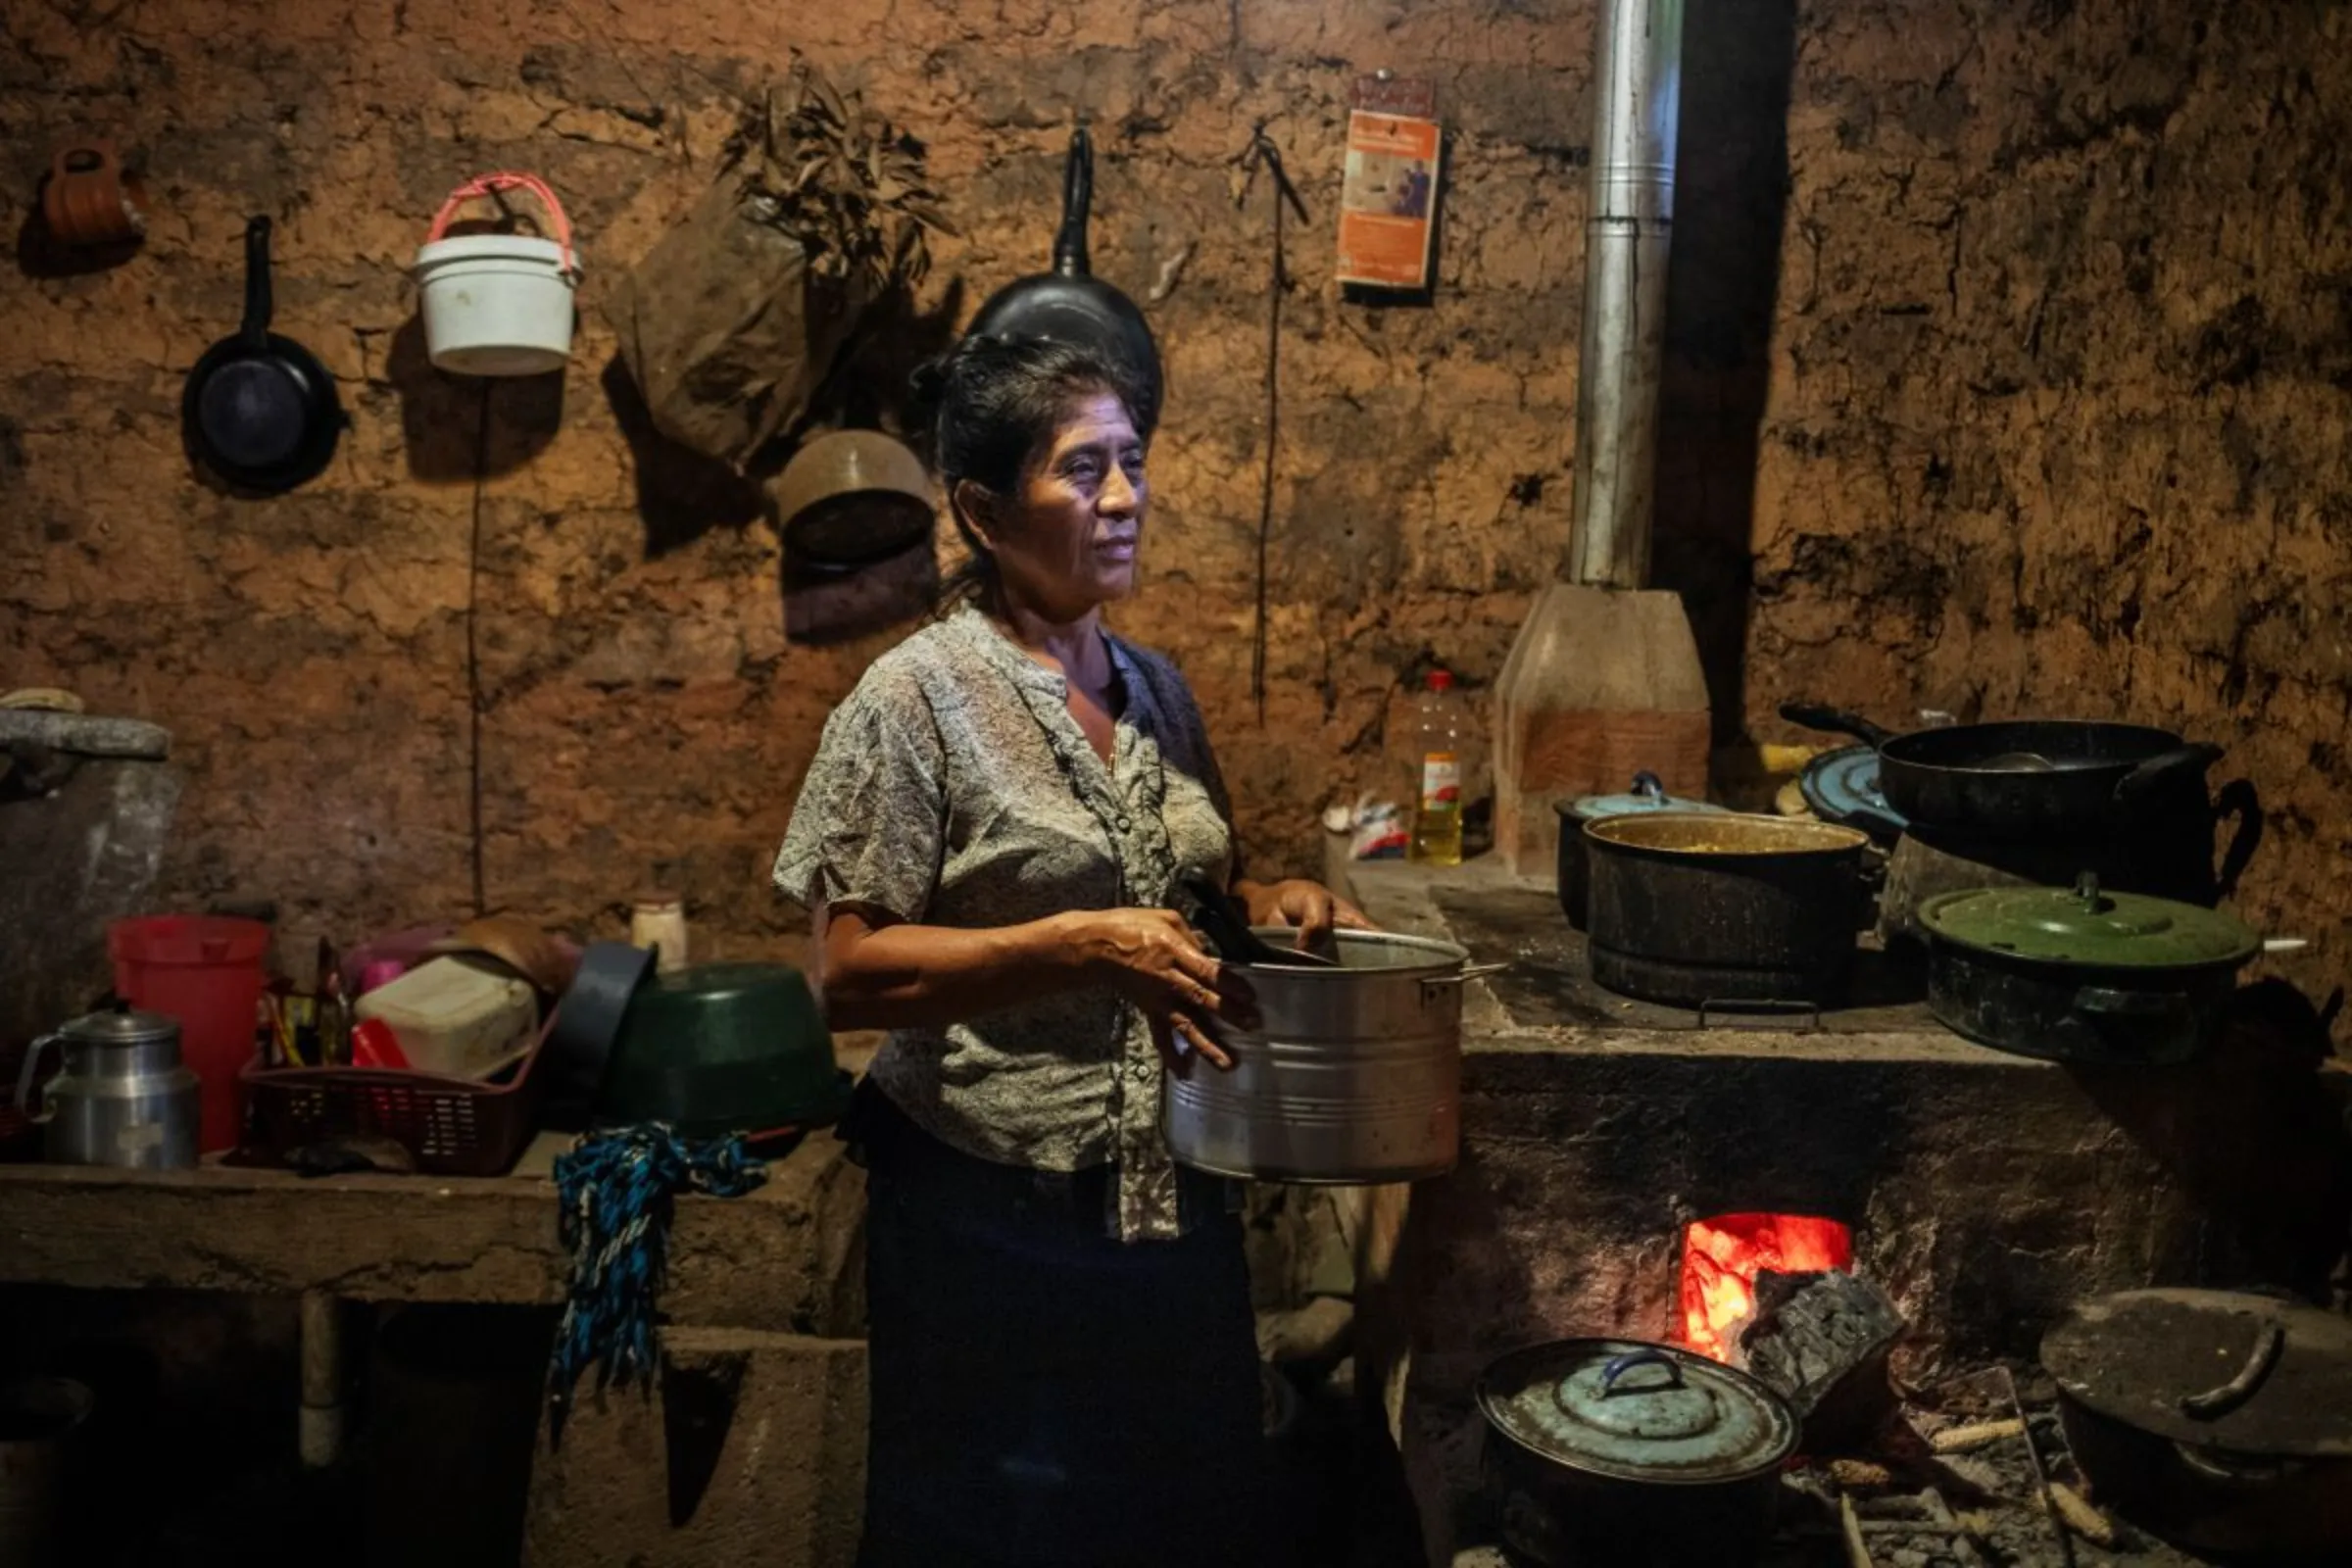 Lorenza Mendoza, whose son migrated to the United States earlier this year, in the kitchen at her farm in the eastern province of Chiquimula, Guatemala, September 7, 2023. Thomson Reuters Foundation/Fabio Cuttica